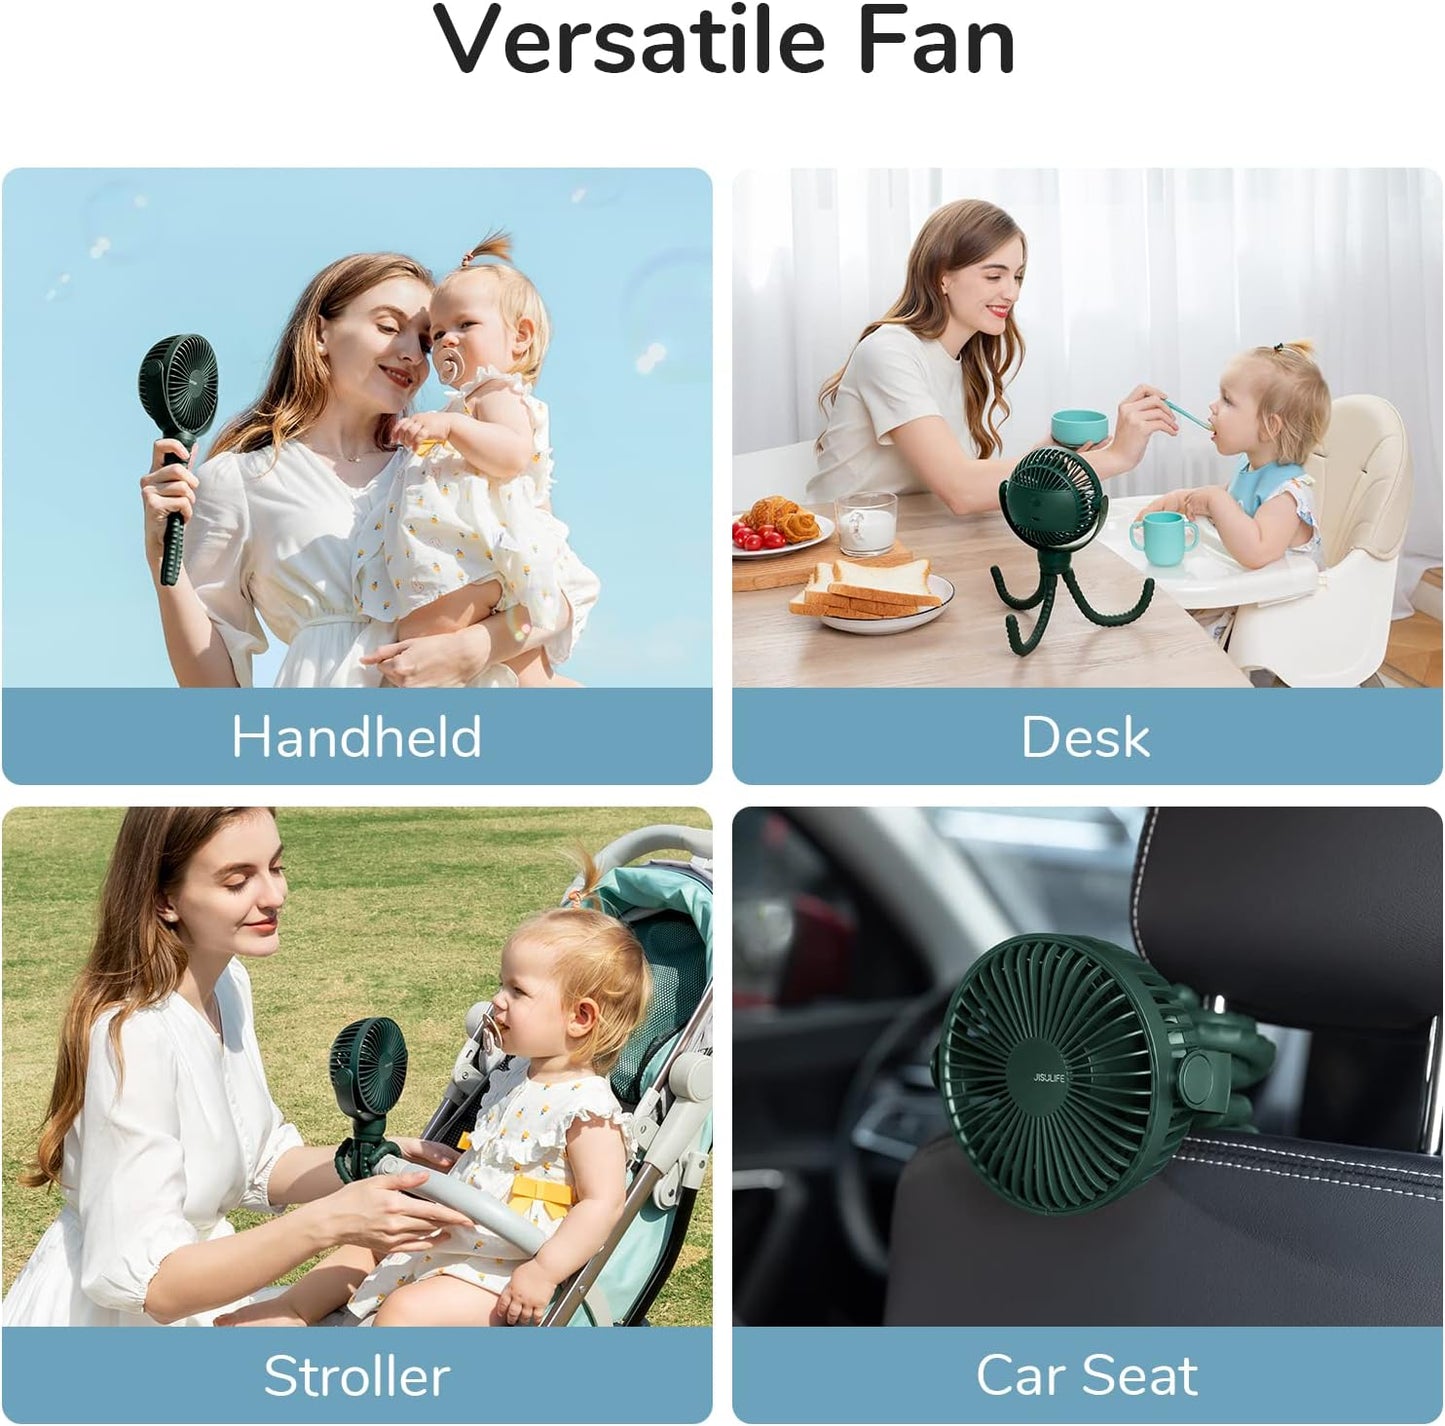 JISULIFE Mini Stroller Fan Clip-on for Baby, 4000mAh Portable Battery Operated or USB Rechargeable Fan with 4 Speeds, 360°Rotatable and Flexible Tripod for Handheld/Desk/Car Seat - Alpine Green